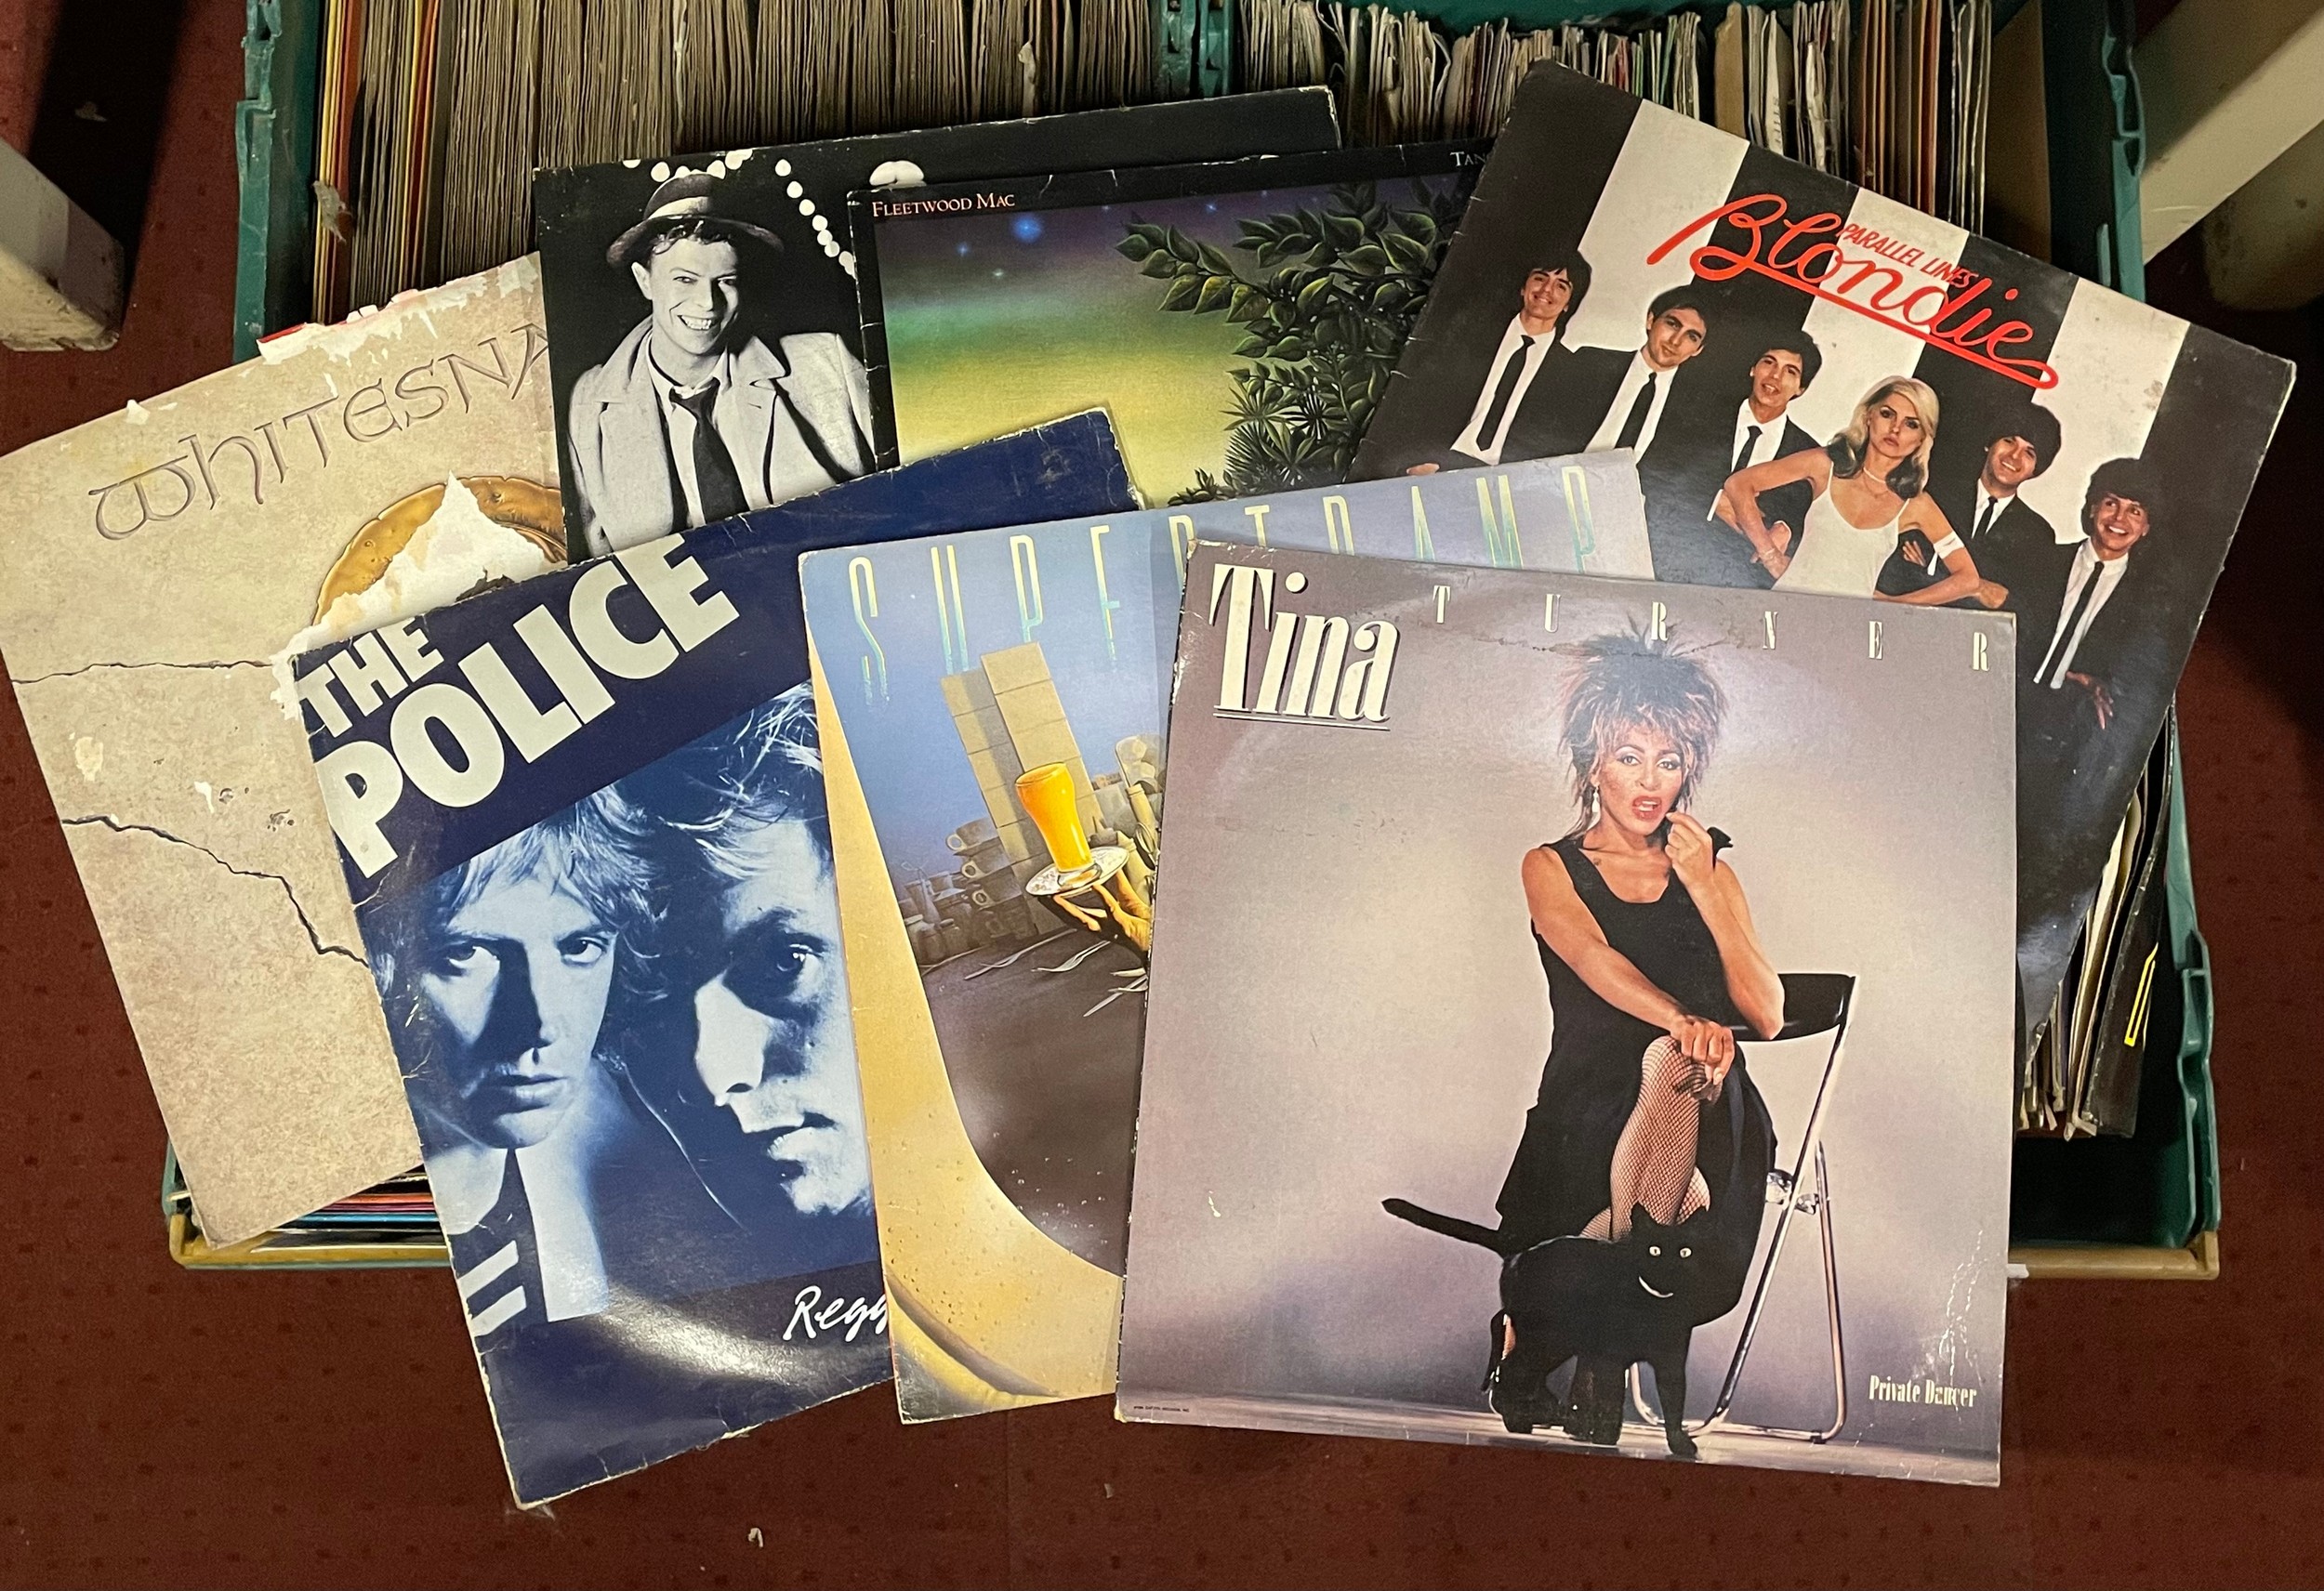 A substantial collection of vinyl records, comprising over three hundred 45rpm singles and over